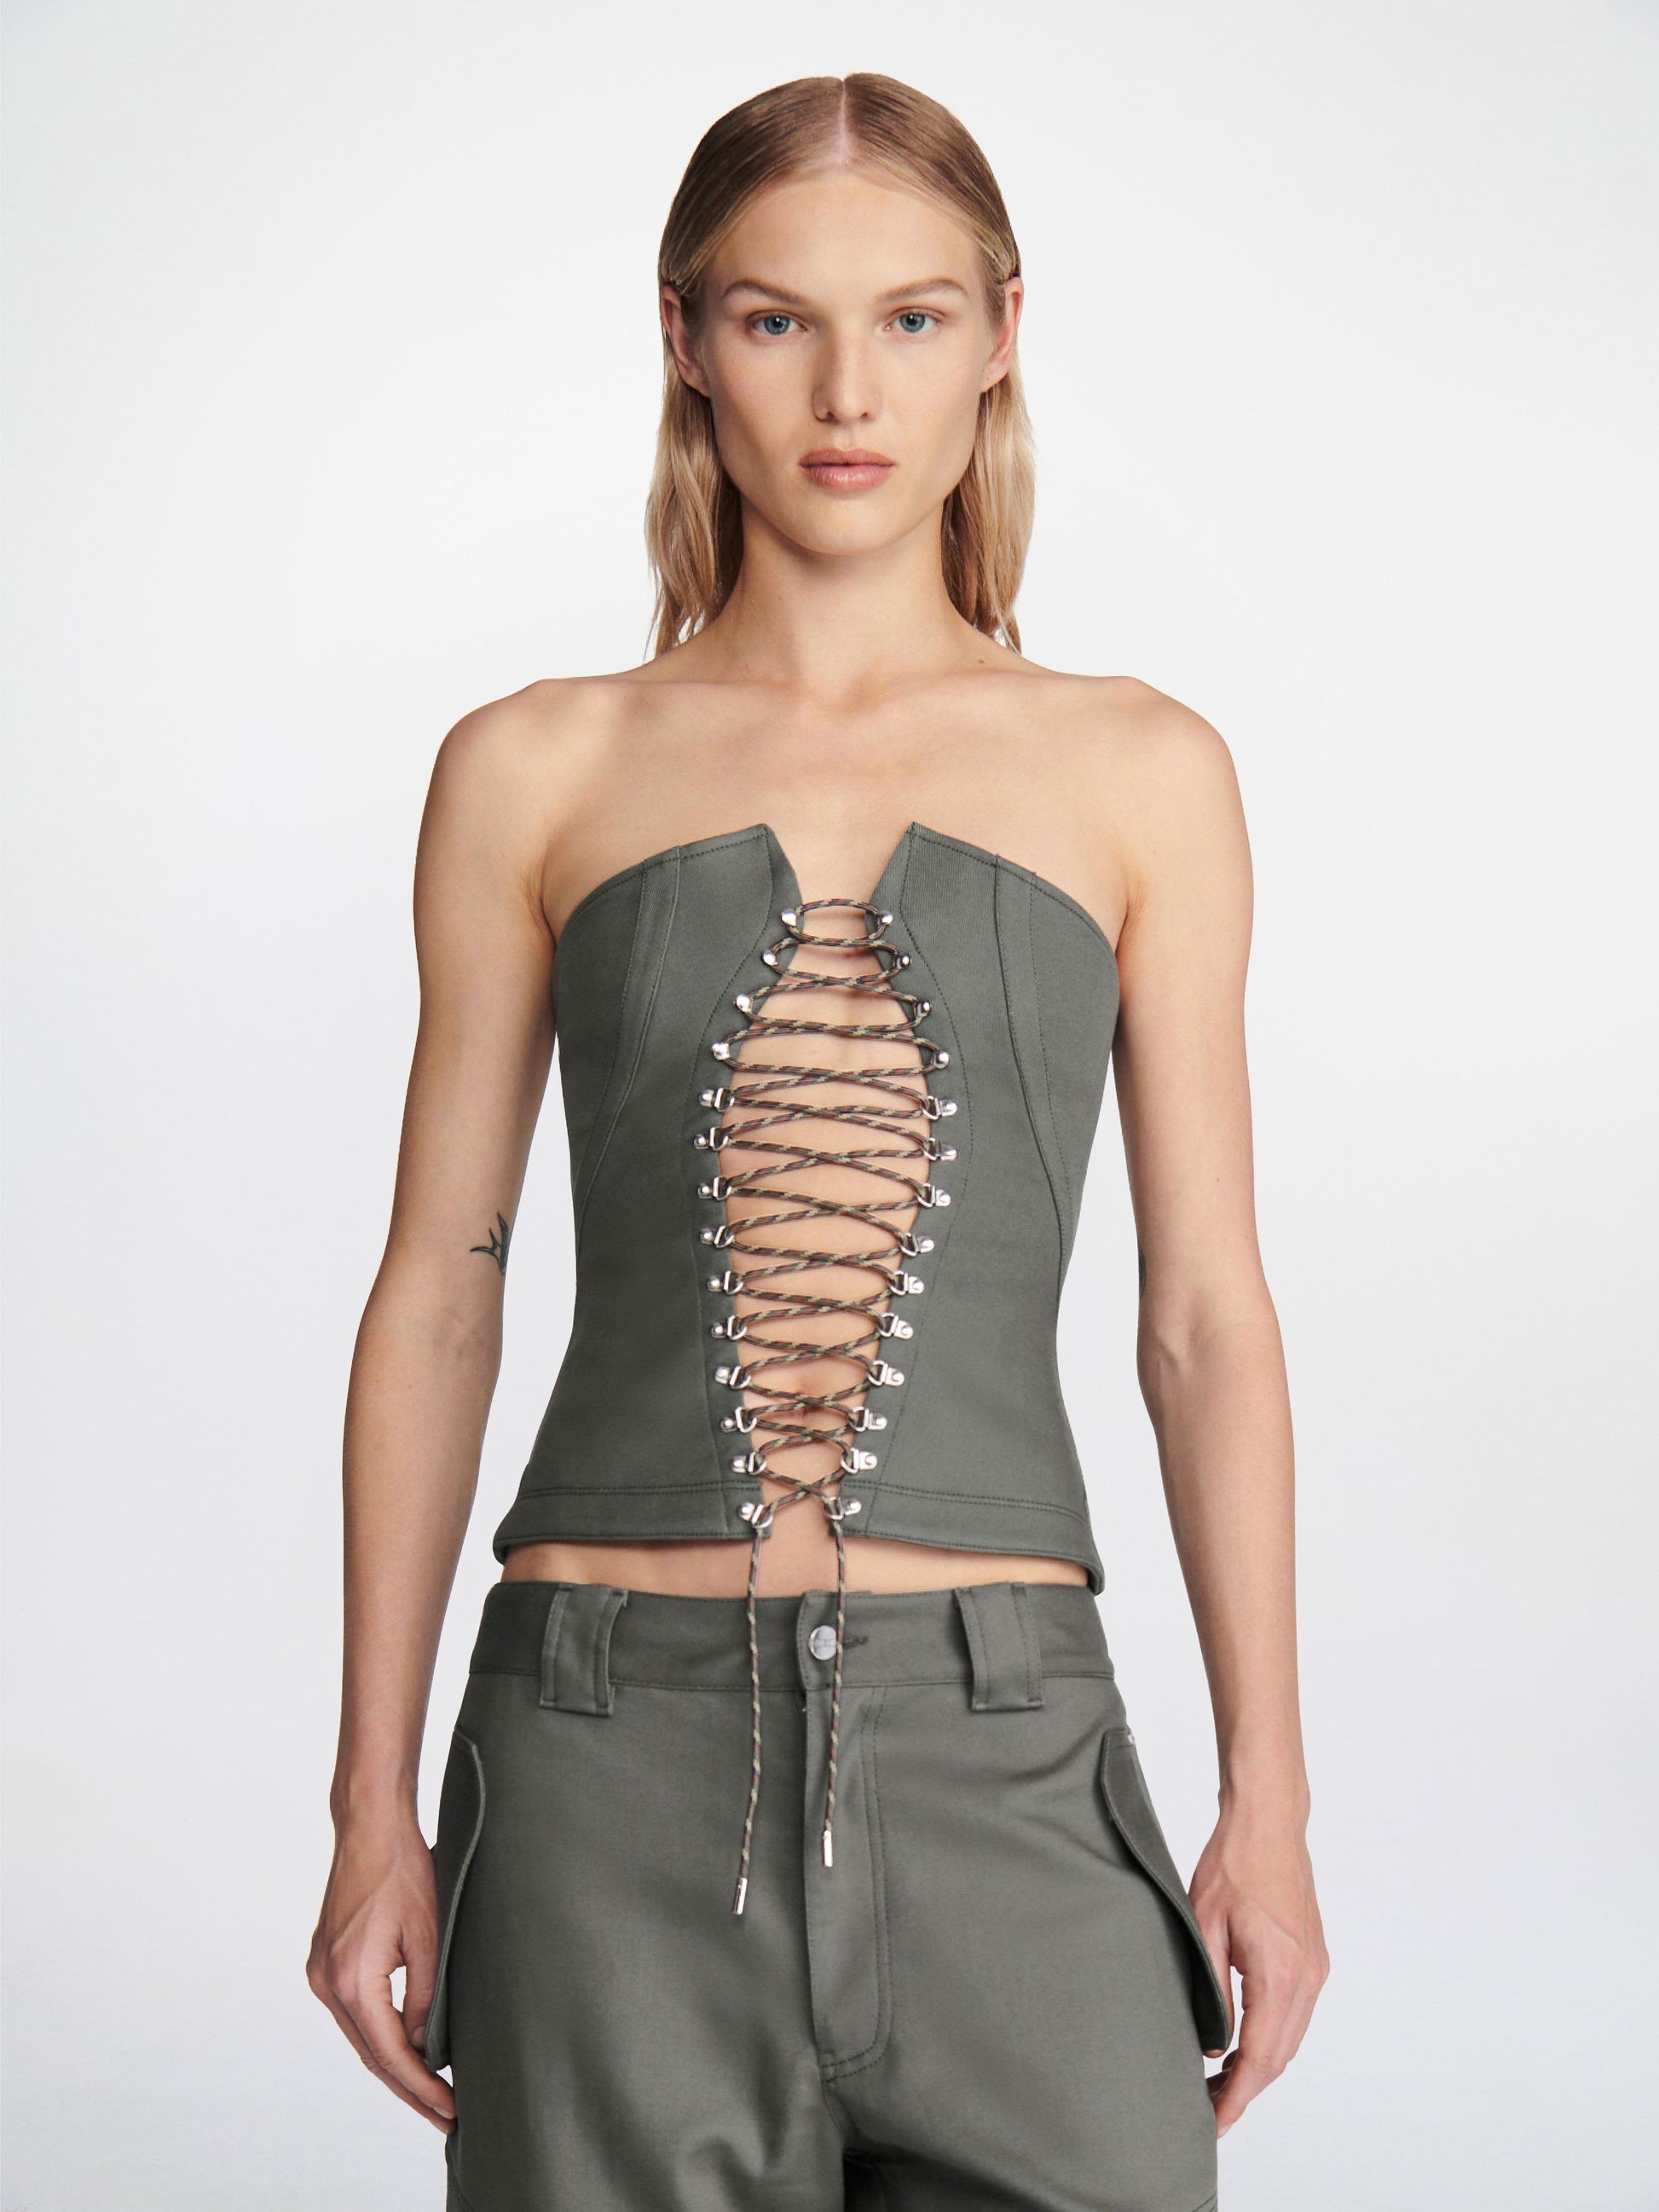 HIKING LACED CORSET